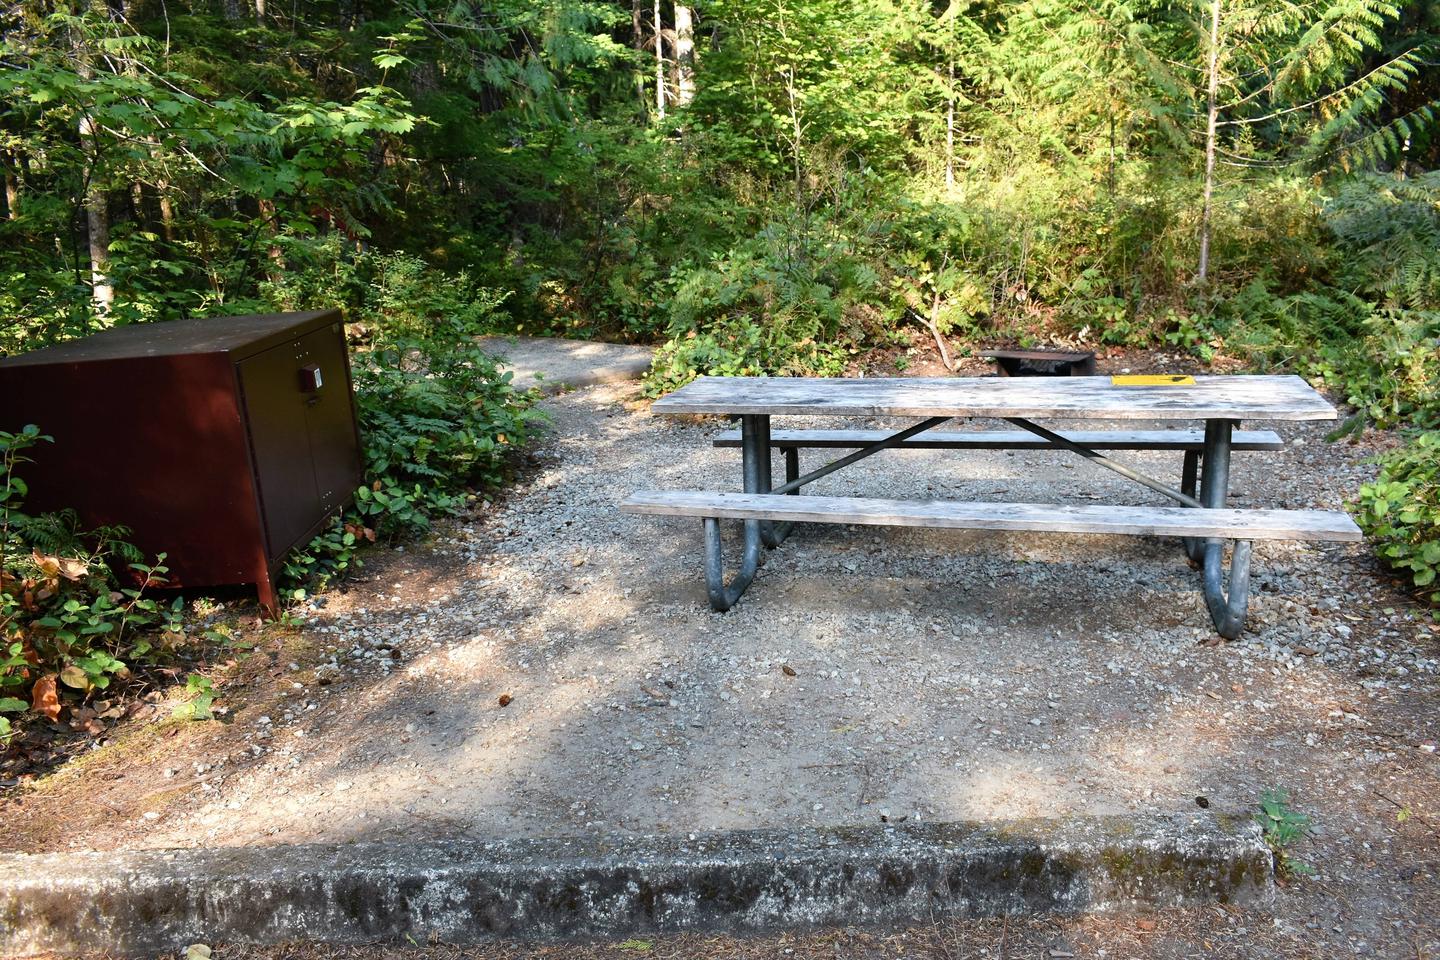 Food storage locker, tent pad, picnic table, and fire ringView of campsite